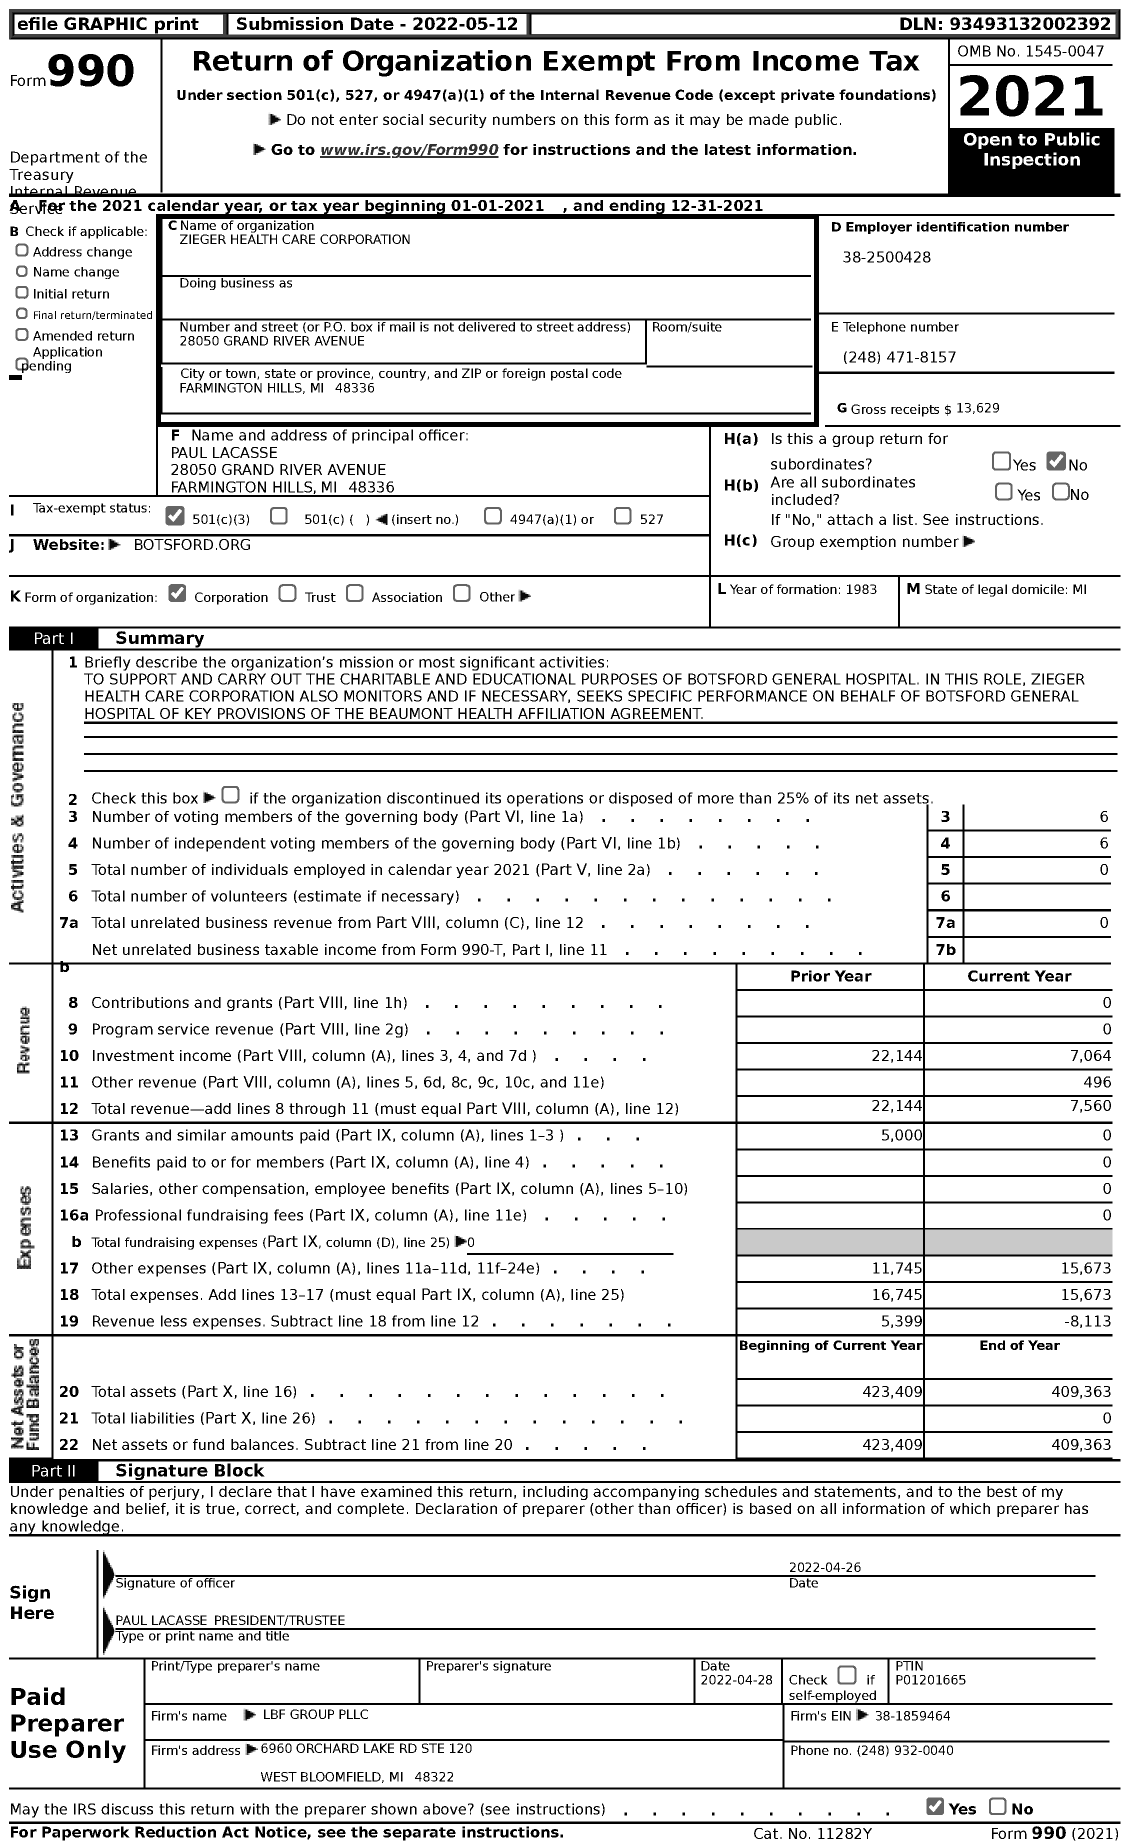 Image of first page of 2021 Form 990 for Zieger Health Care Corporation